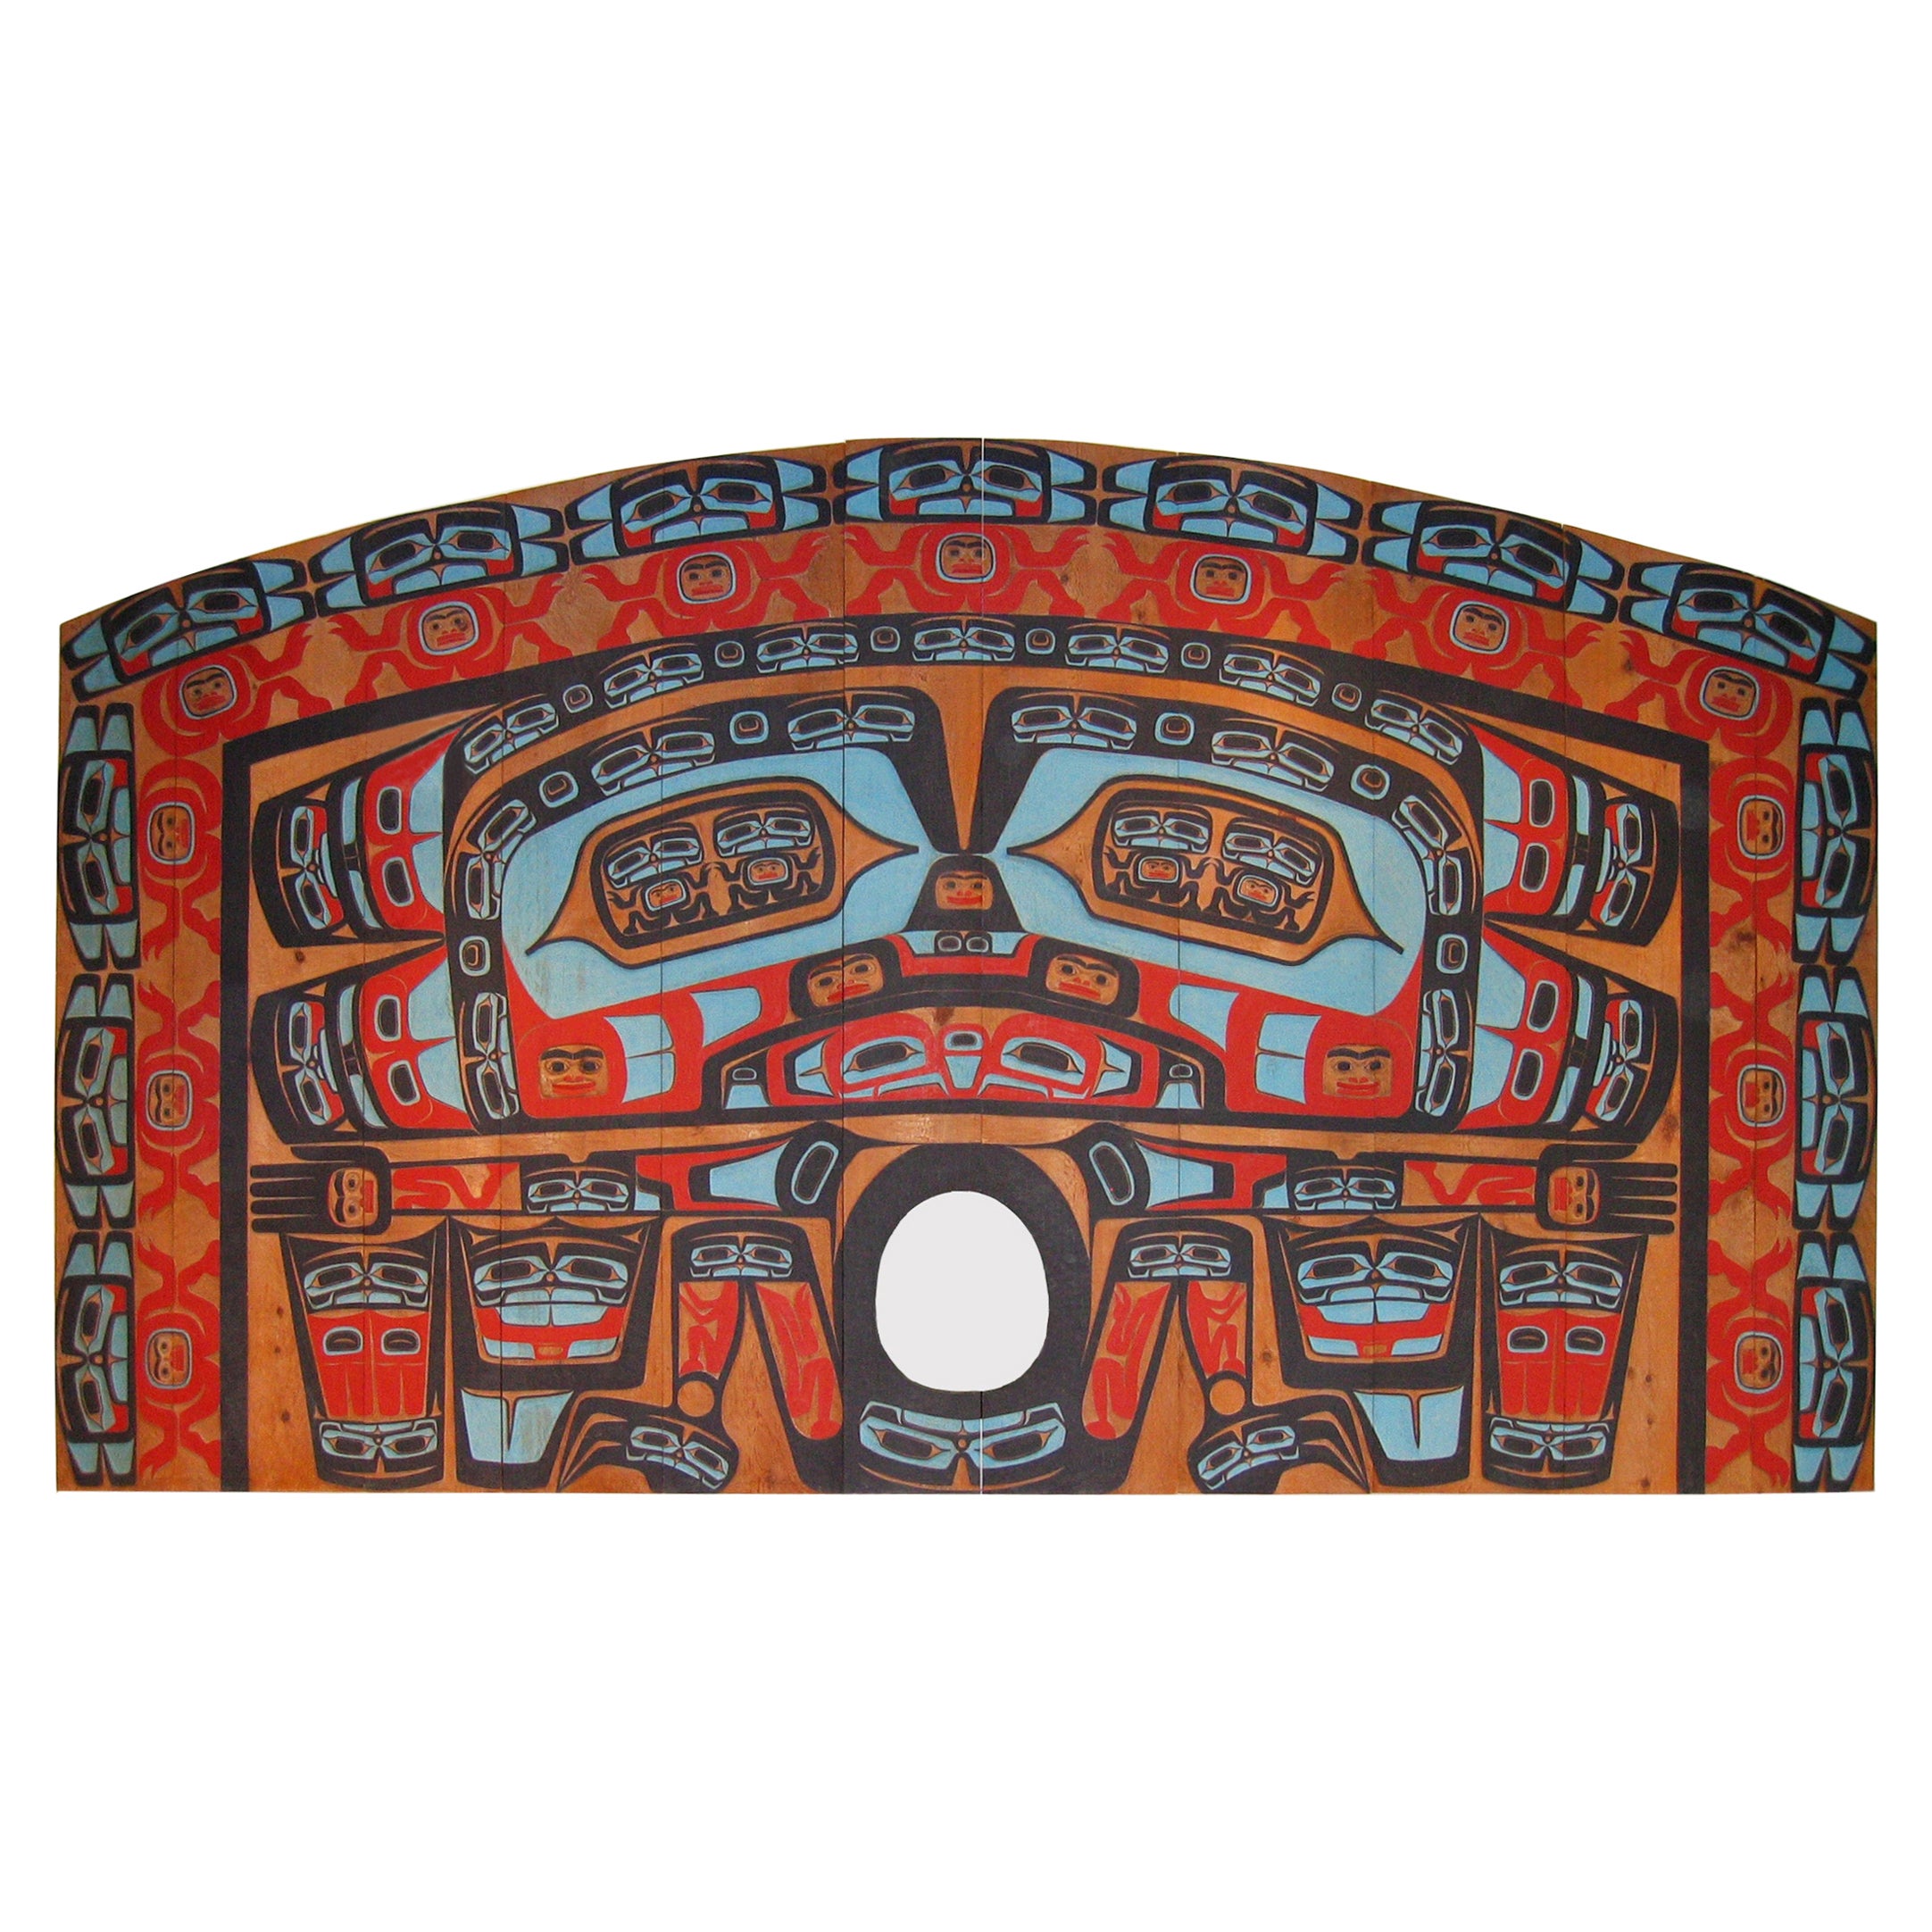 Pacific Northwest Tlingit Whale House Rain Wall from Donald Judd Estate, c. 1968